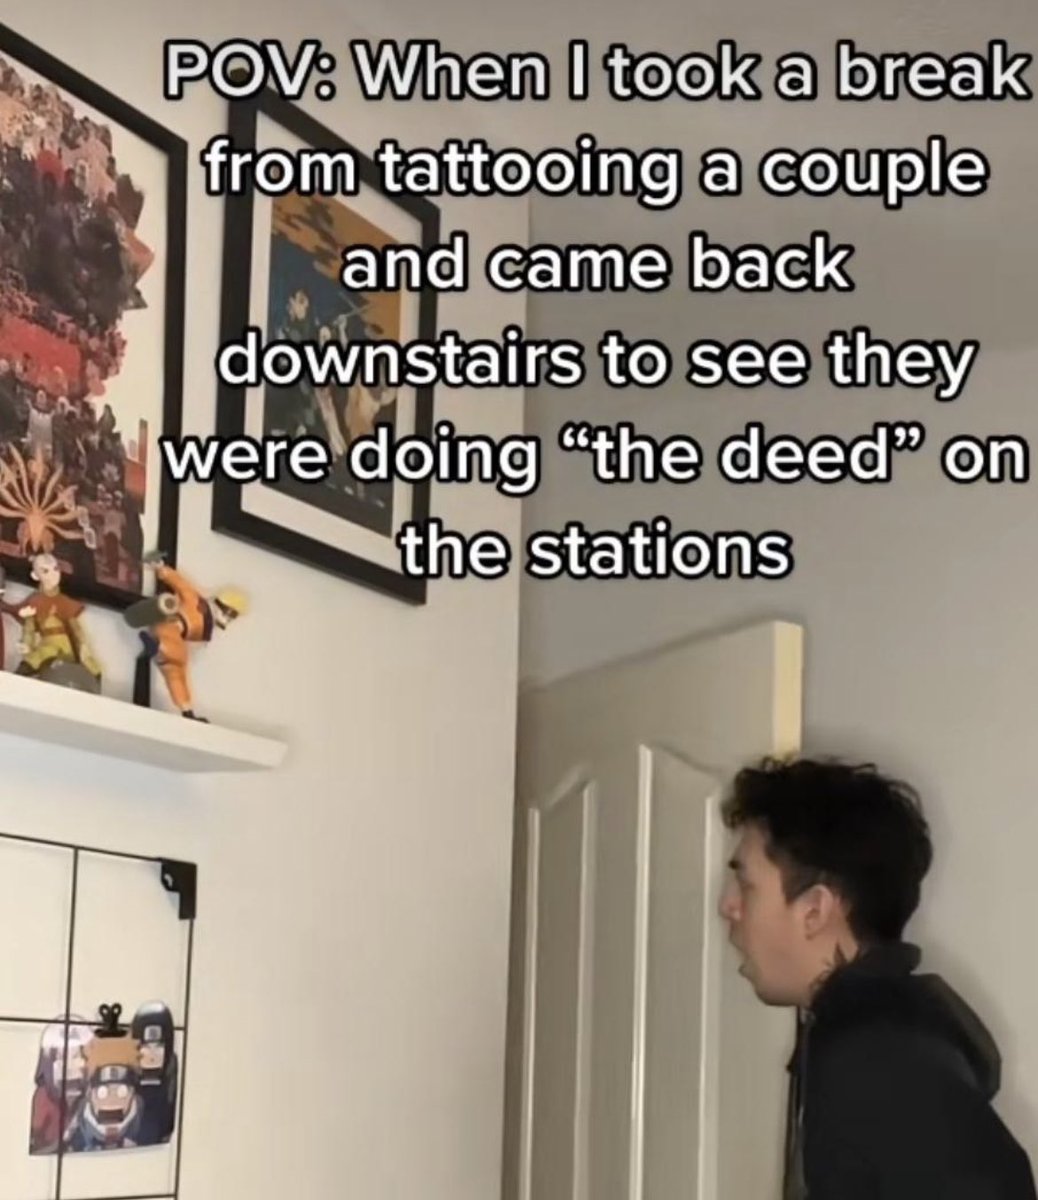 TikTok screenshots - interior design - Pov When I took a break from tattooing a couple and came back downstairs to see they were doing